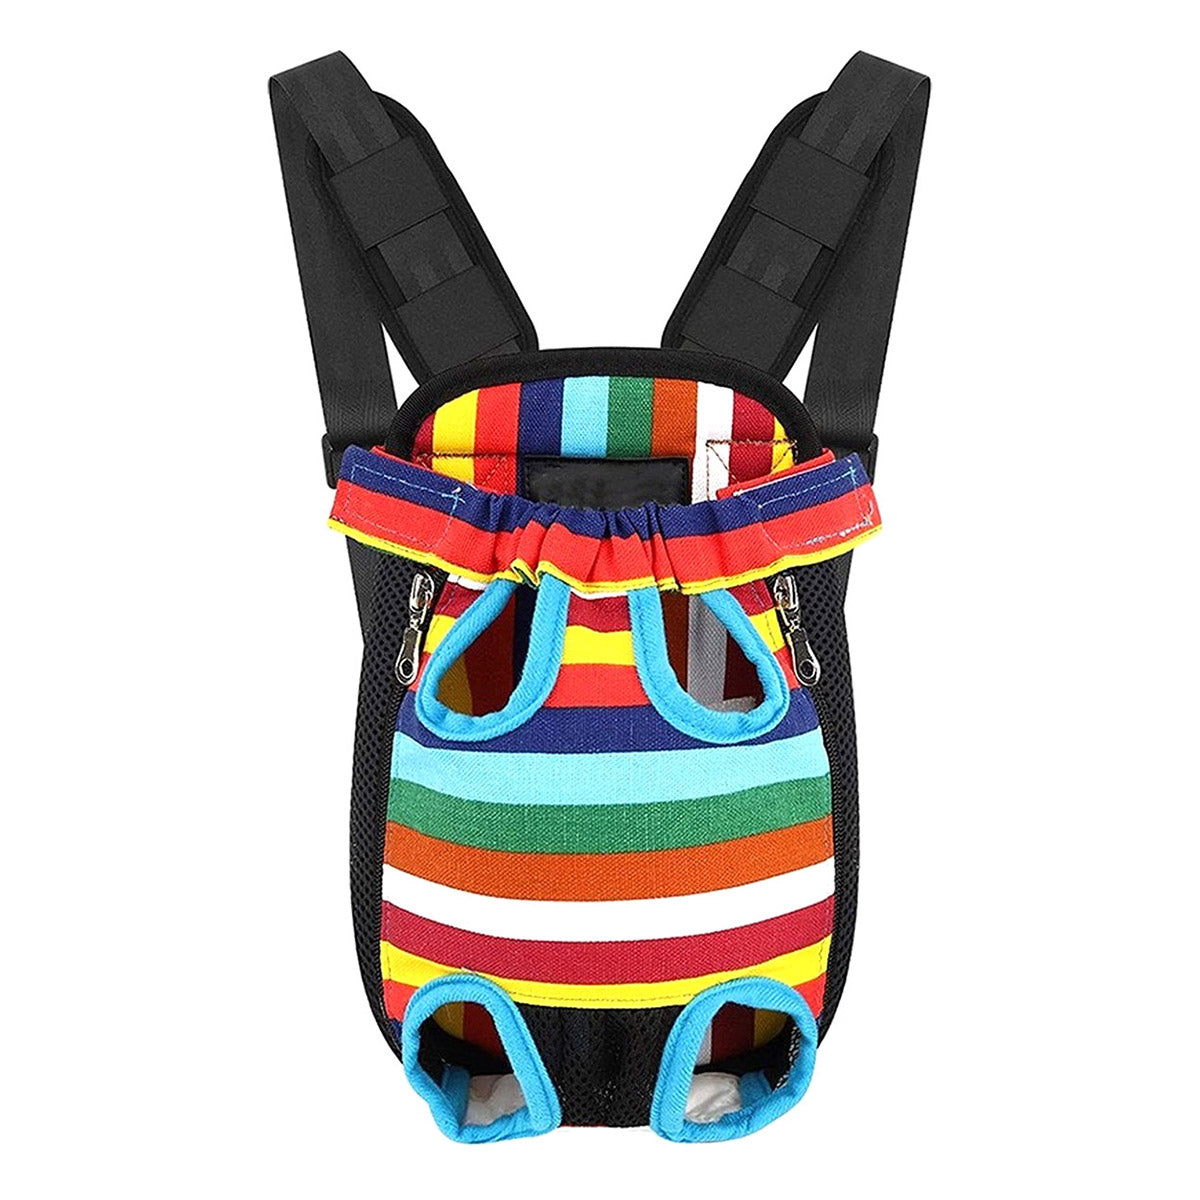 <tc>Ariko</tc> dog carrier - backpack - carrier bag - dog backpack - dog carrier - also for your cat - rainbow